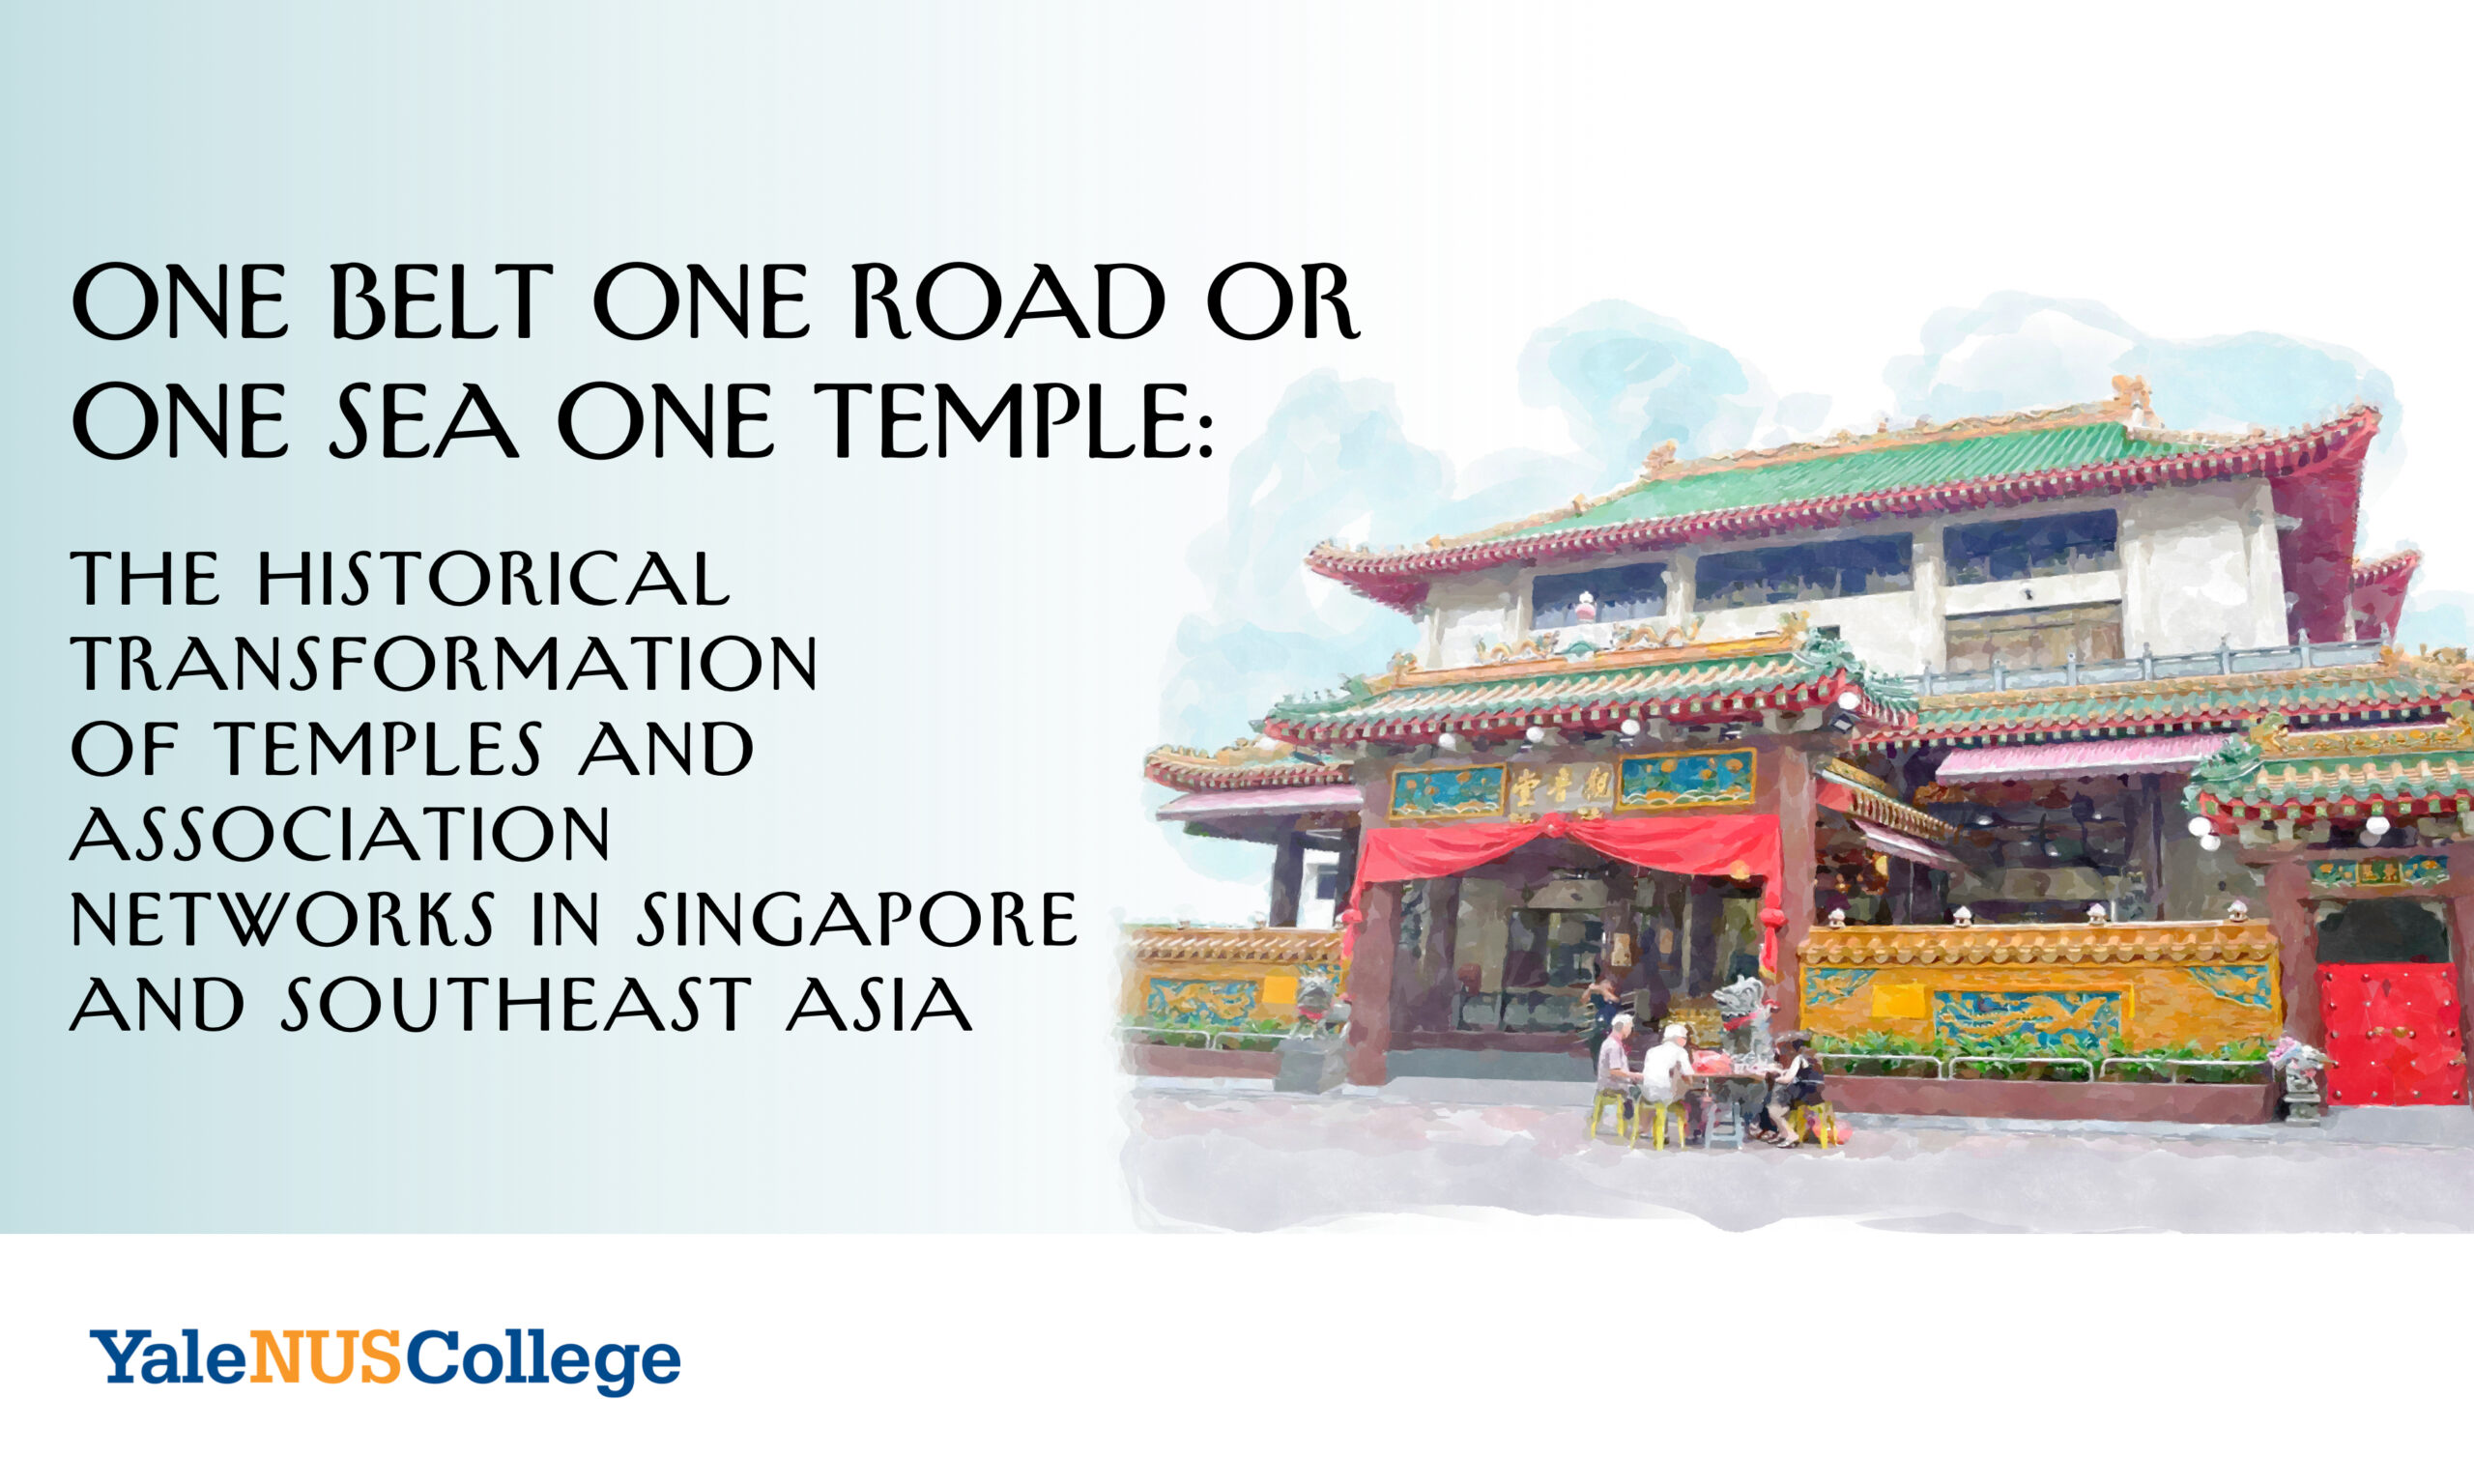 One Belt One Road or One Sea One Temple The Historical Transformation of Temples and Association Networks in Singapore and Southeast Asia